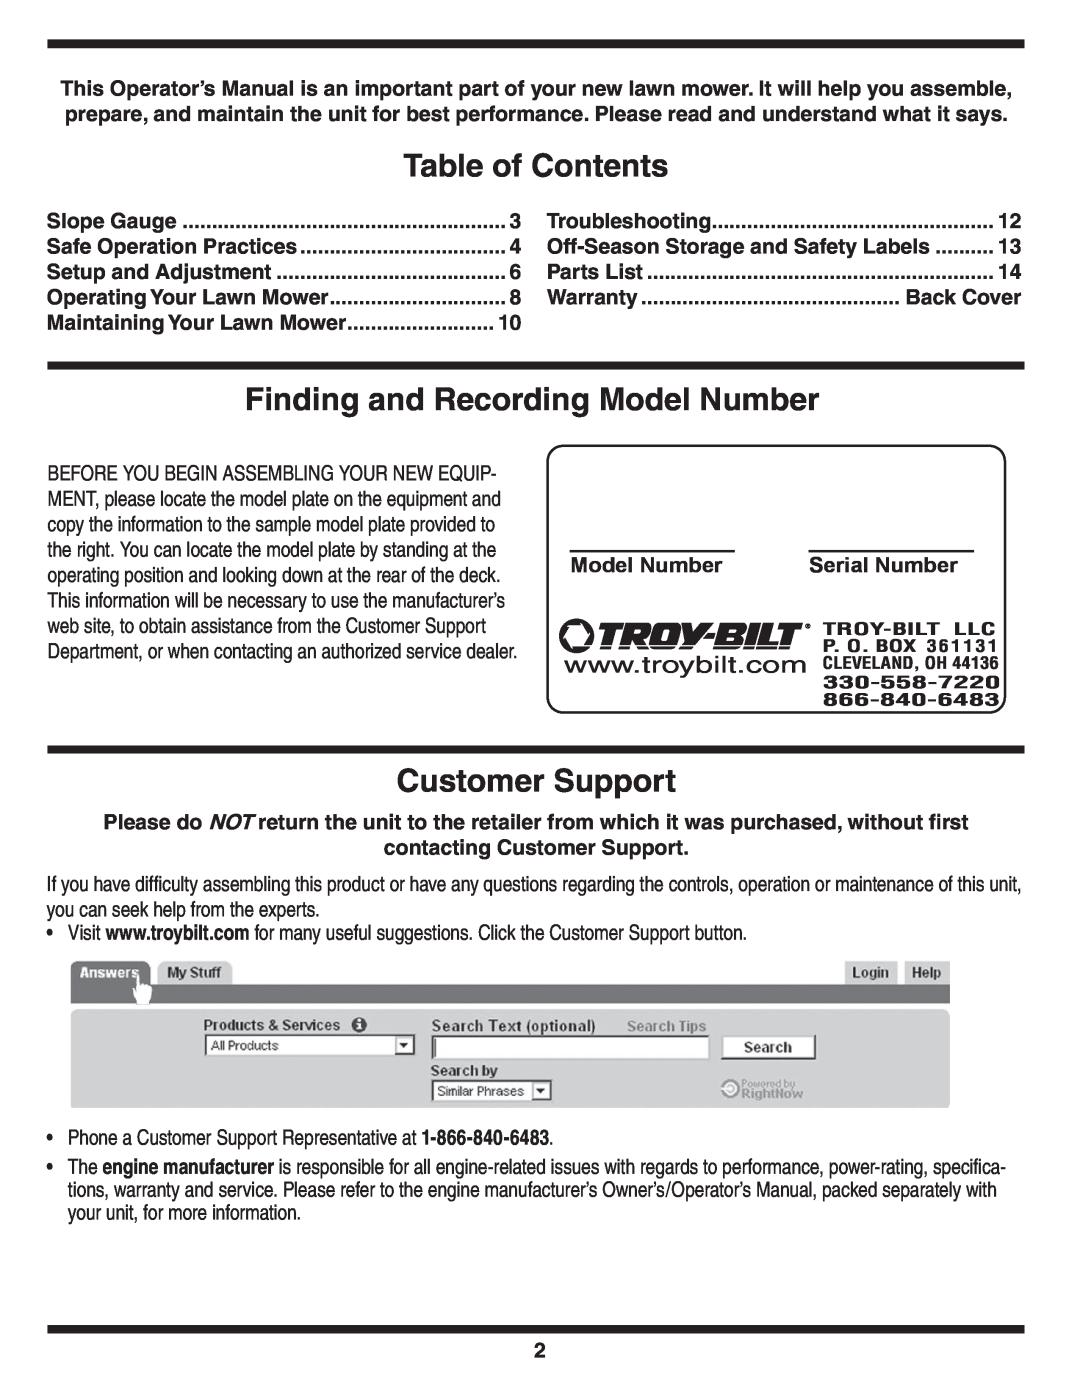 Troy-Bilt 569 warranty Table of Contents, Finding and Recording Model Number, Customer Support, Serial Number 